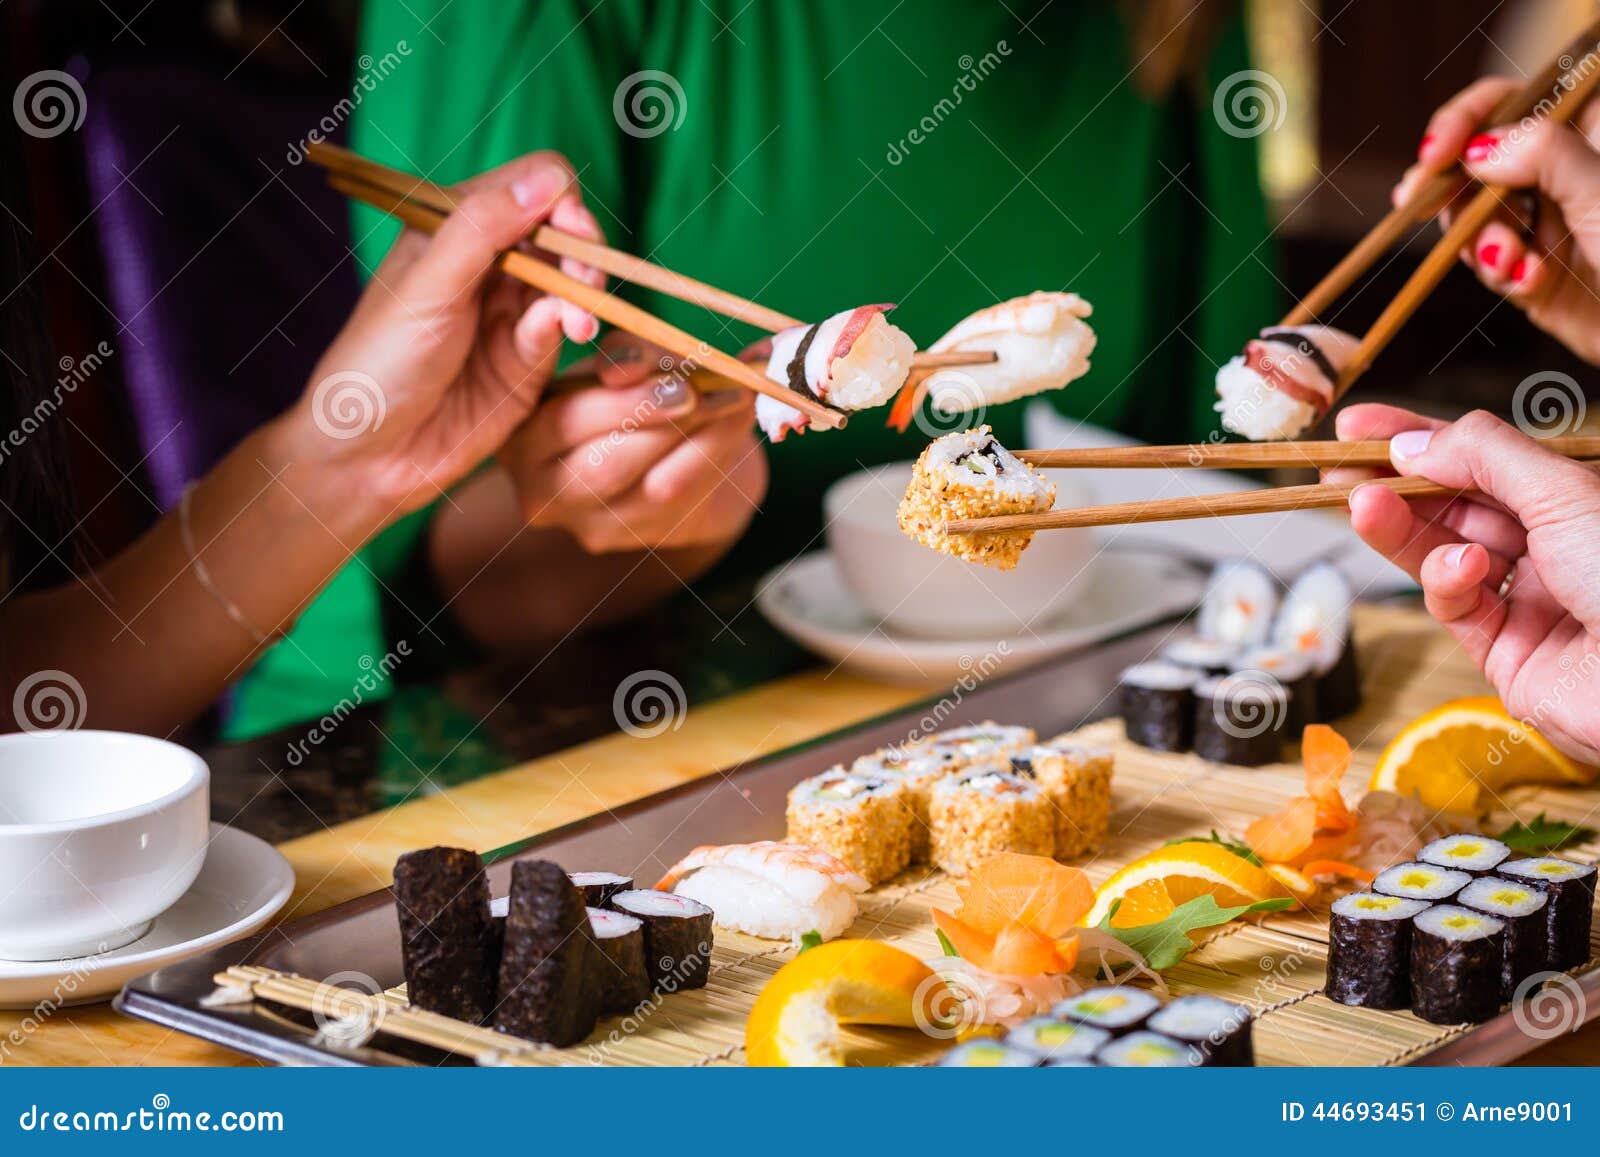 young people eating sushi in restaurant